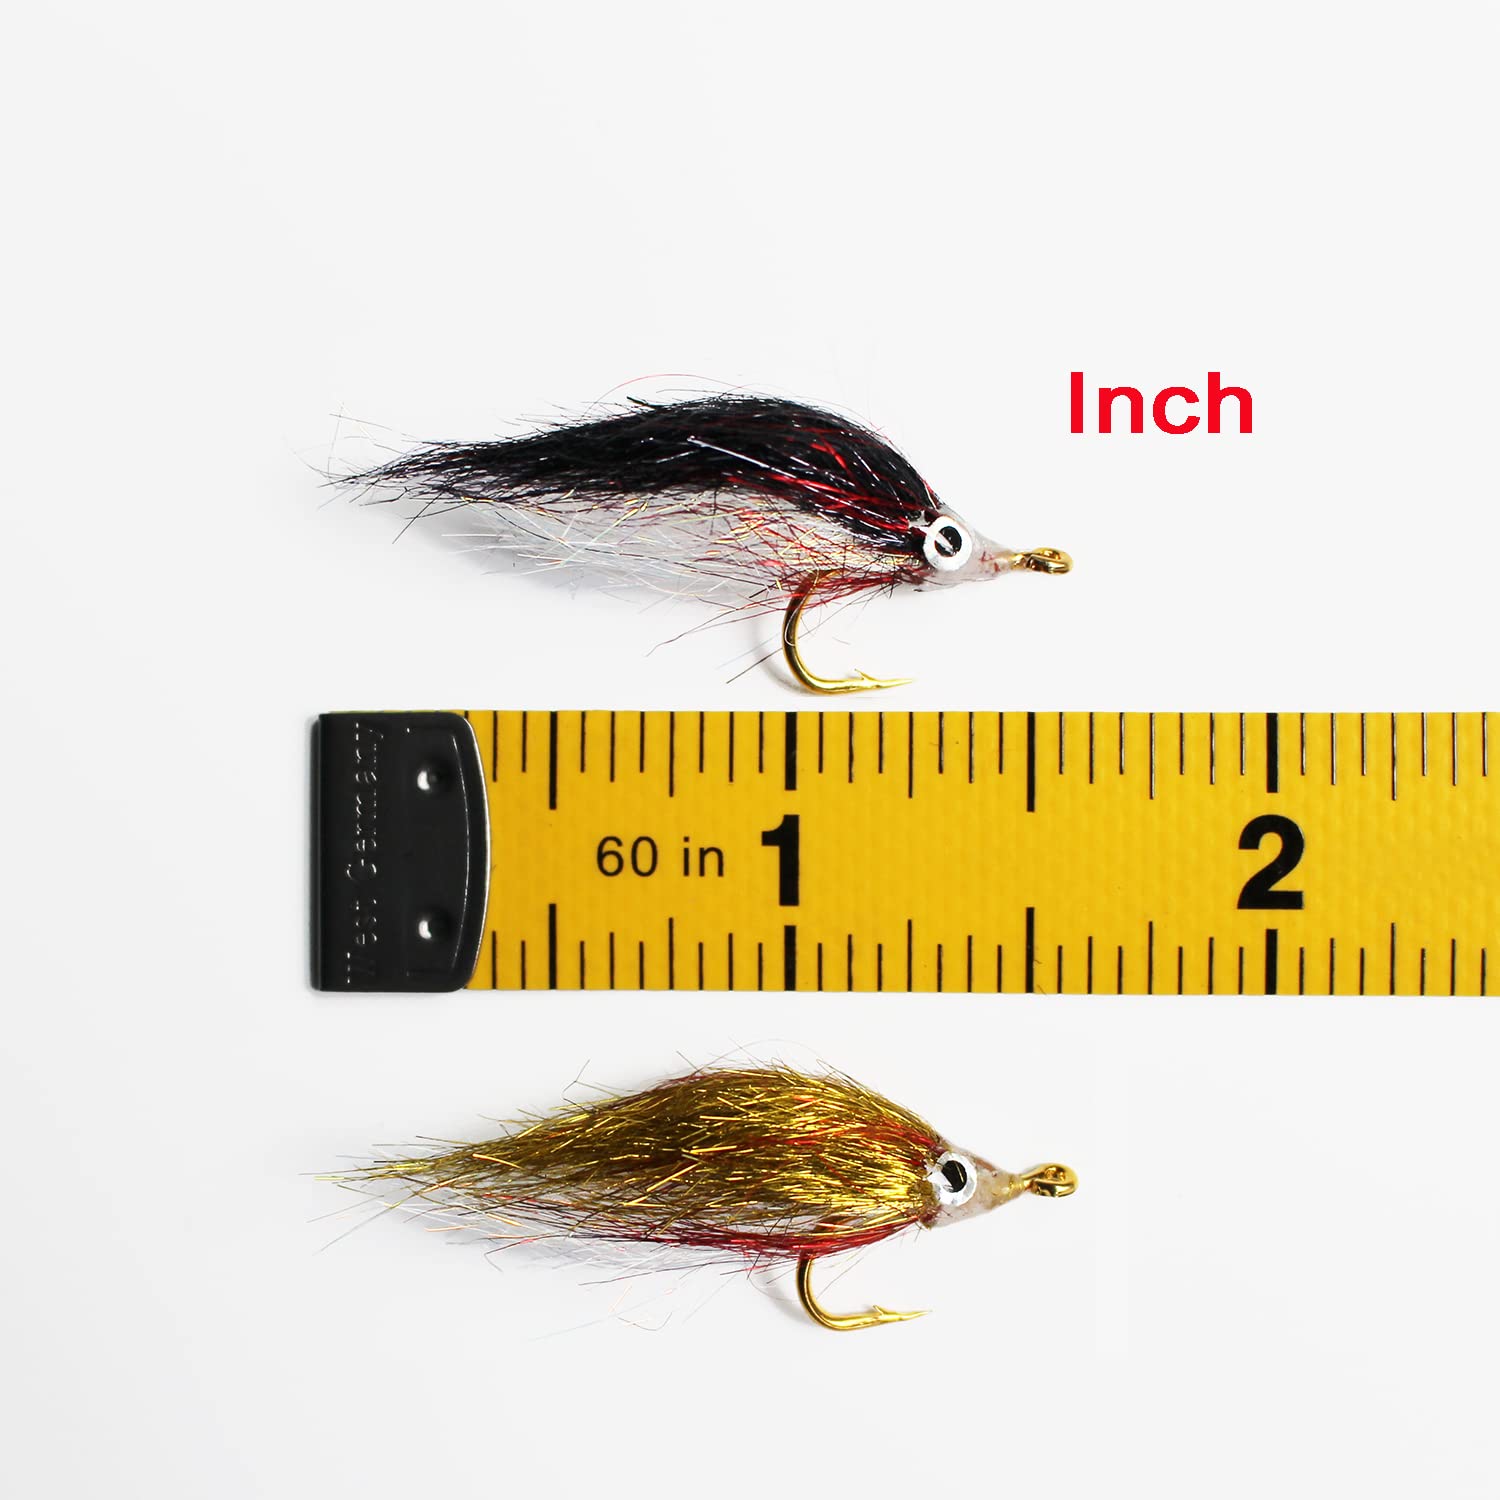 Fly Fishing Flies Lures Wounded Minnow Fly Slowly Sinking Salmon